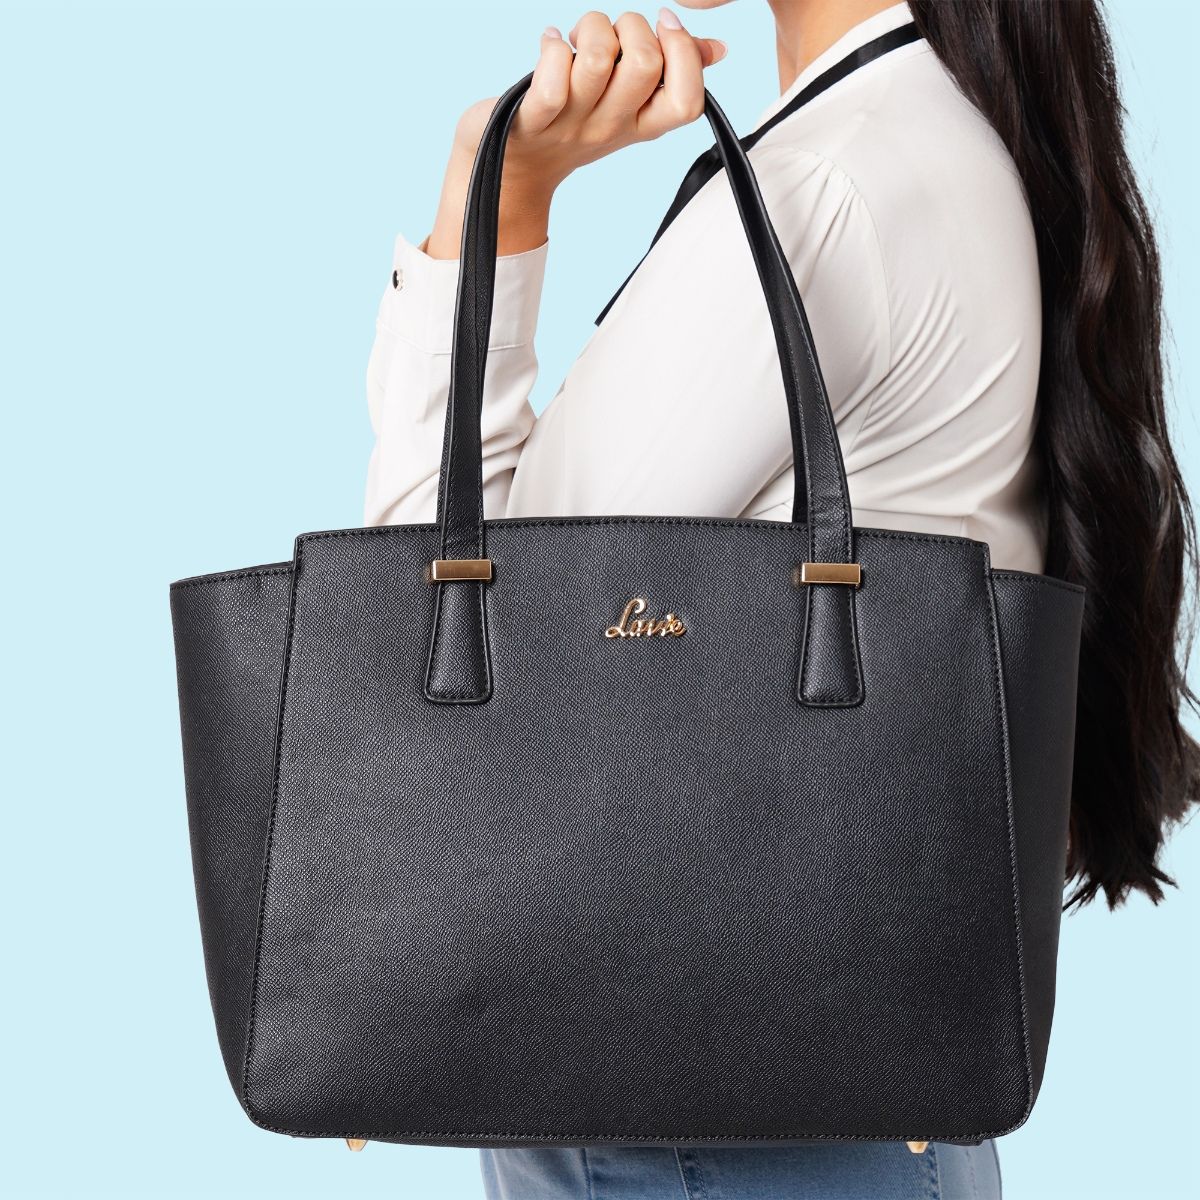 2023 Autumn Winter Womens Designer Lavie Shoulder Bags Multi Functional Crossbody  Tote With Chain Strap Factory Direct Sales From Owoffstores88, $61.45 |  DHgate.Com